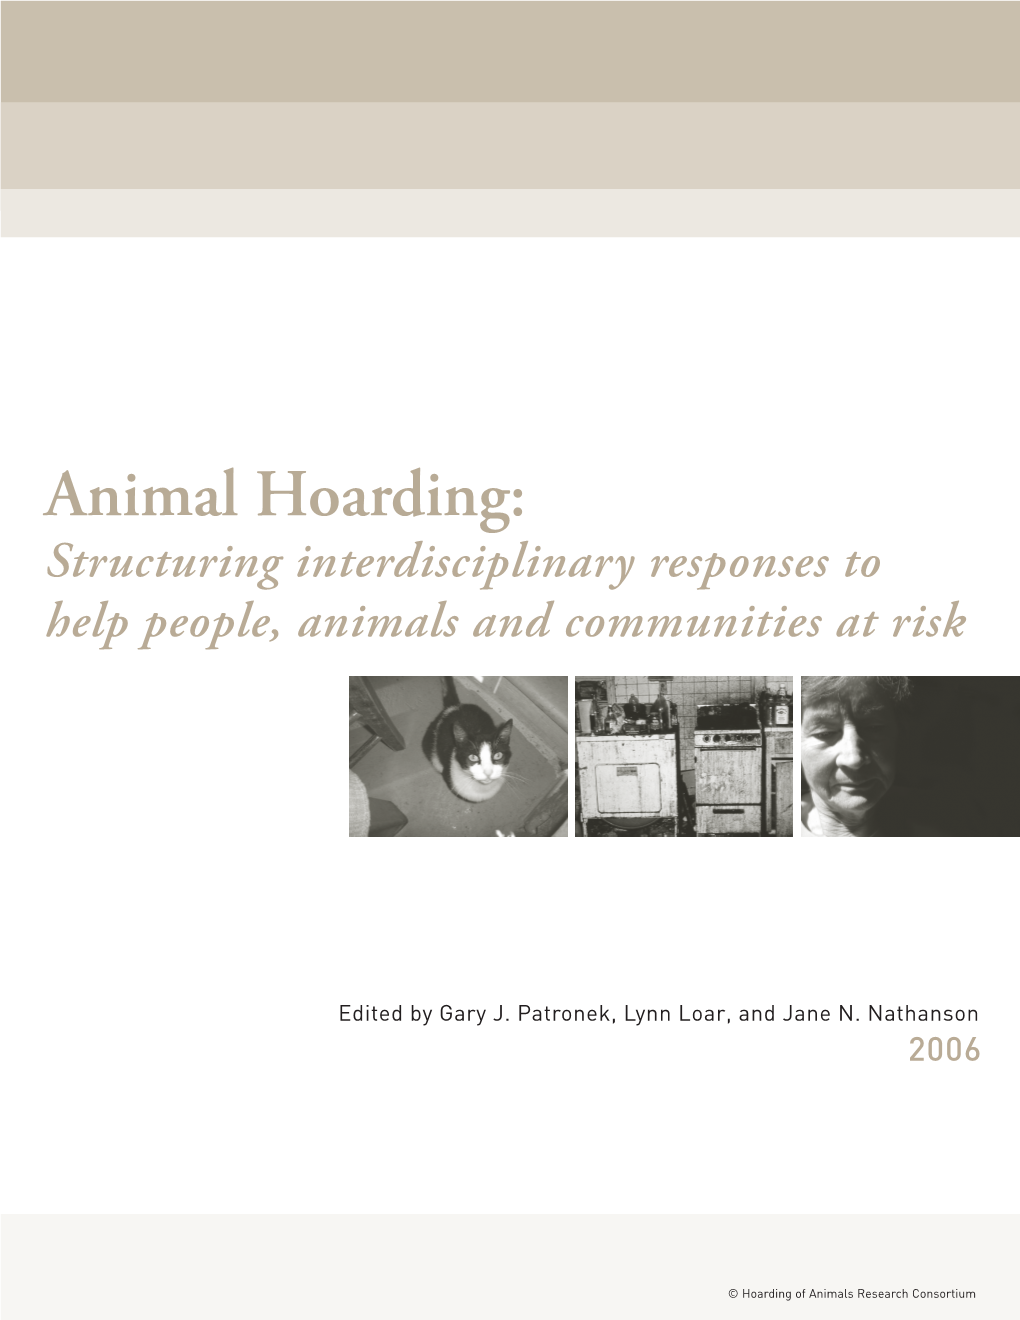 Animal Hoarding: Structuring Interdisciplinary Responses to Help People, Animals and Communities at Risk